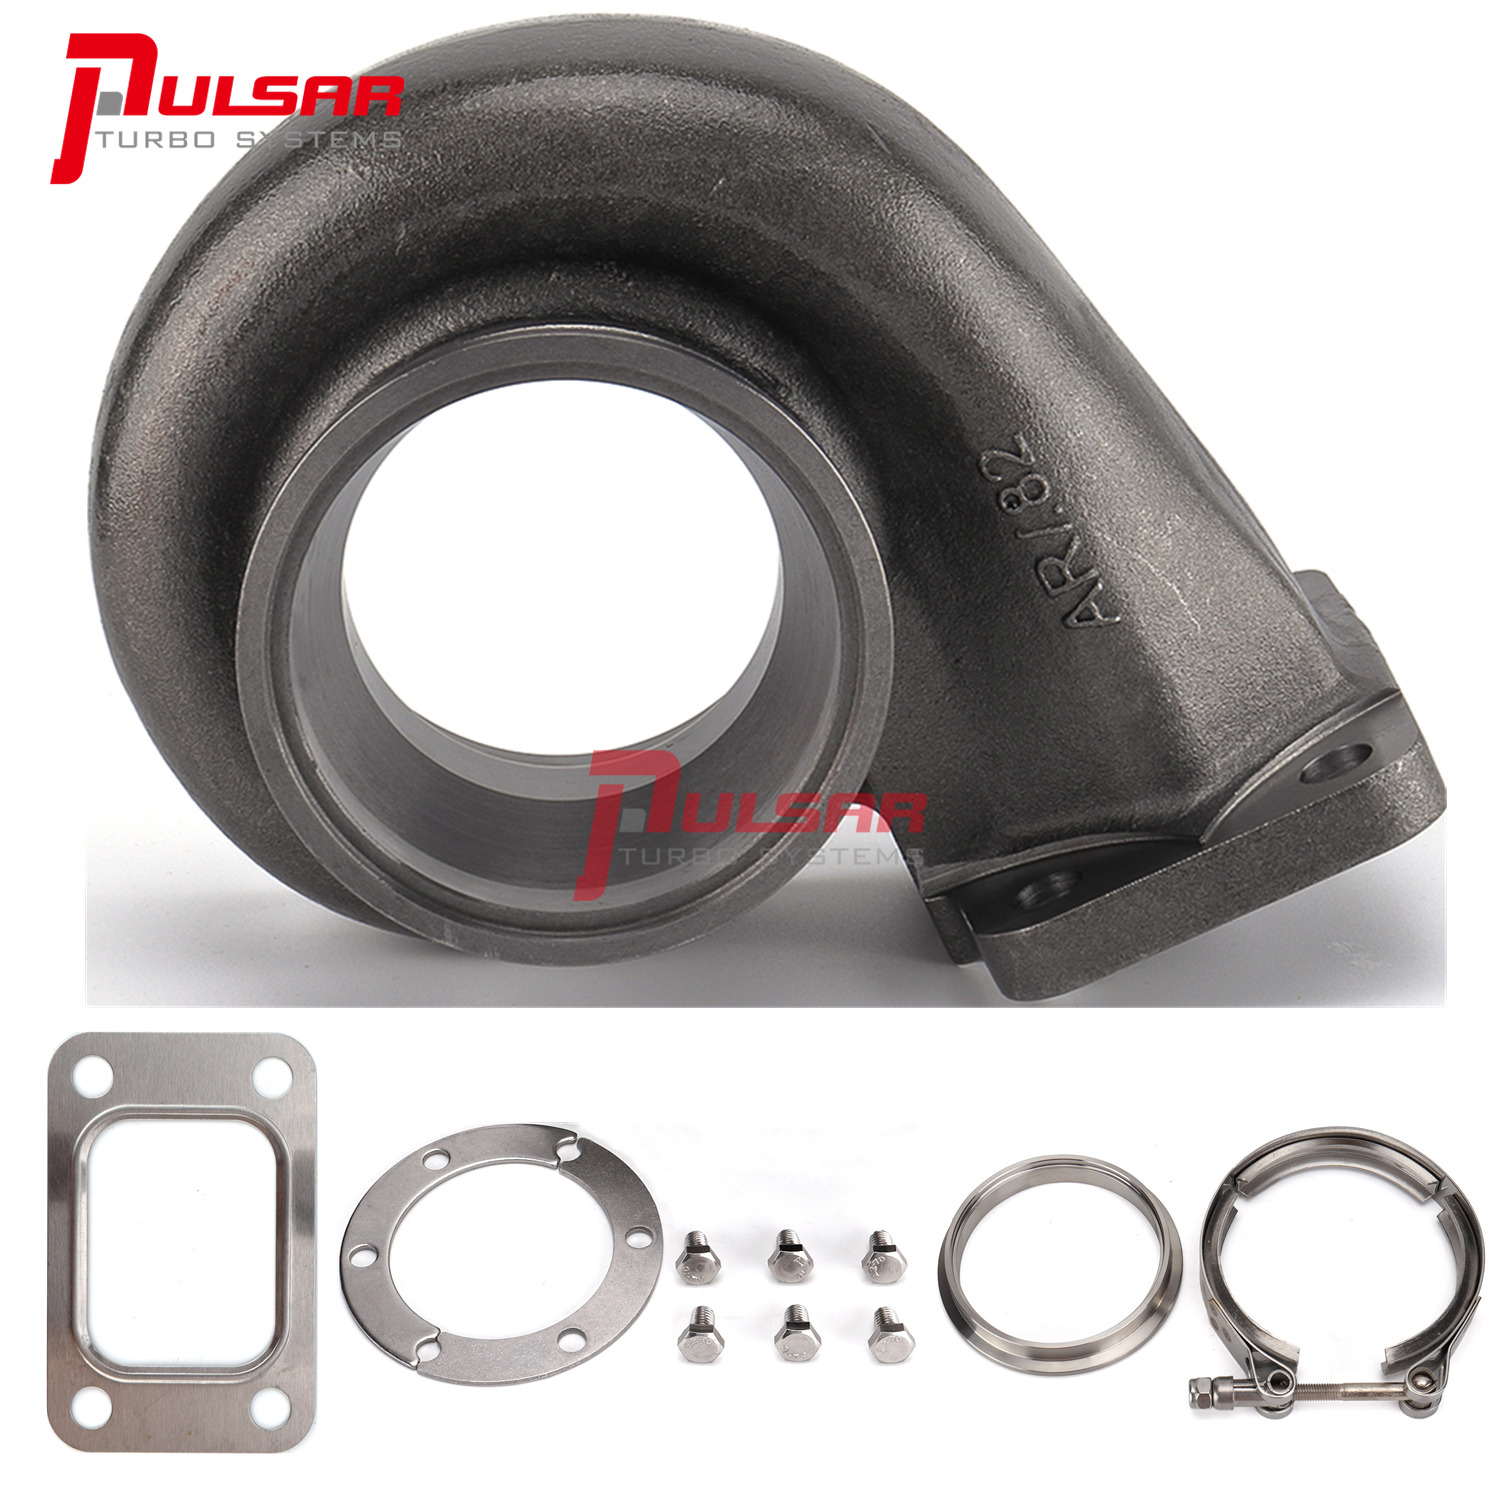 Pulsar T3 Inlet, Vband Outlet 0.82A/R Turbine Housing for PSR3576 PSR3582 Turbos